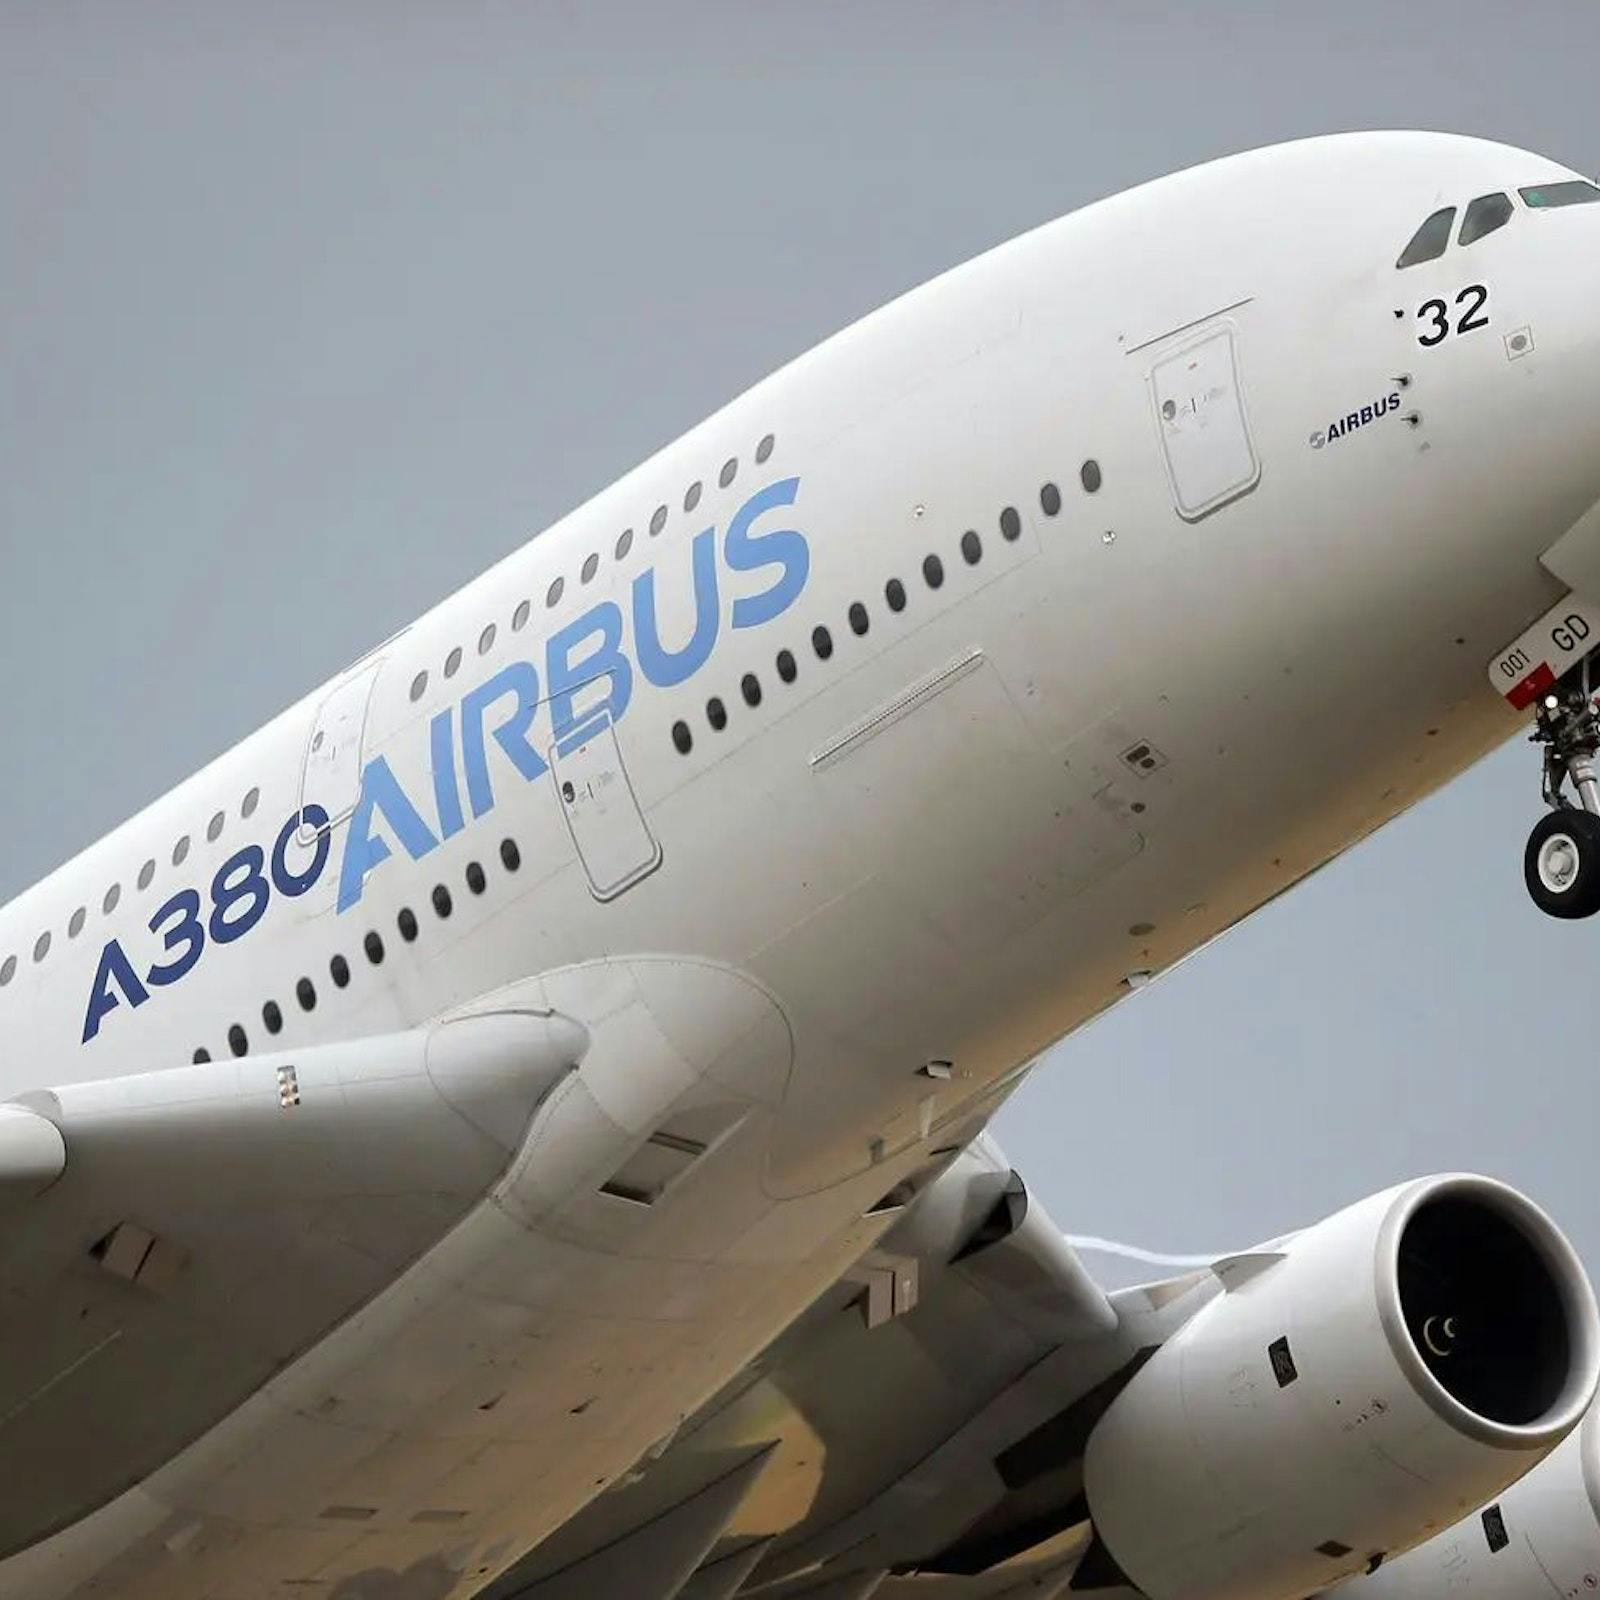 Airbus to Pay $4 Billion to Settle Corruption Inquiry - The New York Times